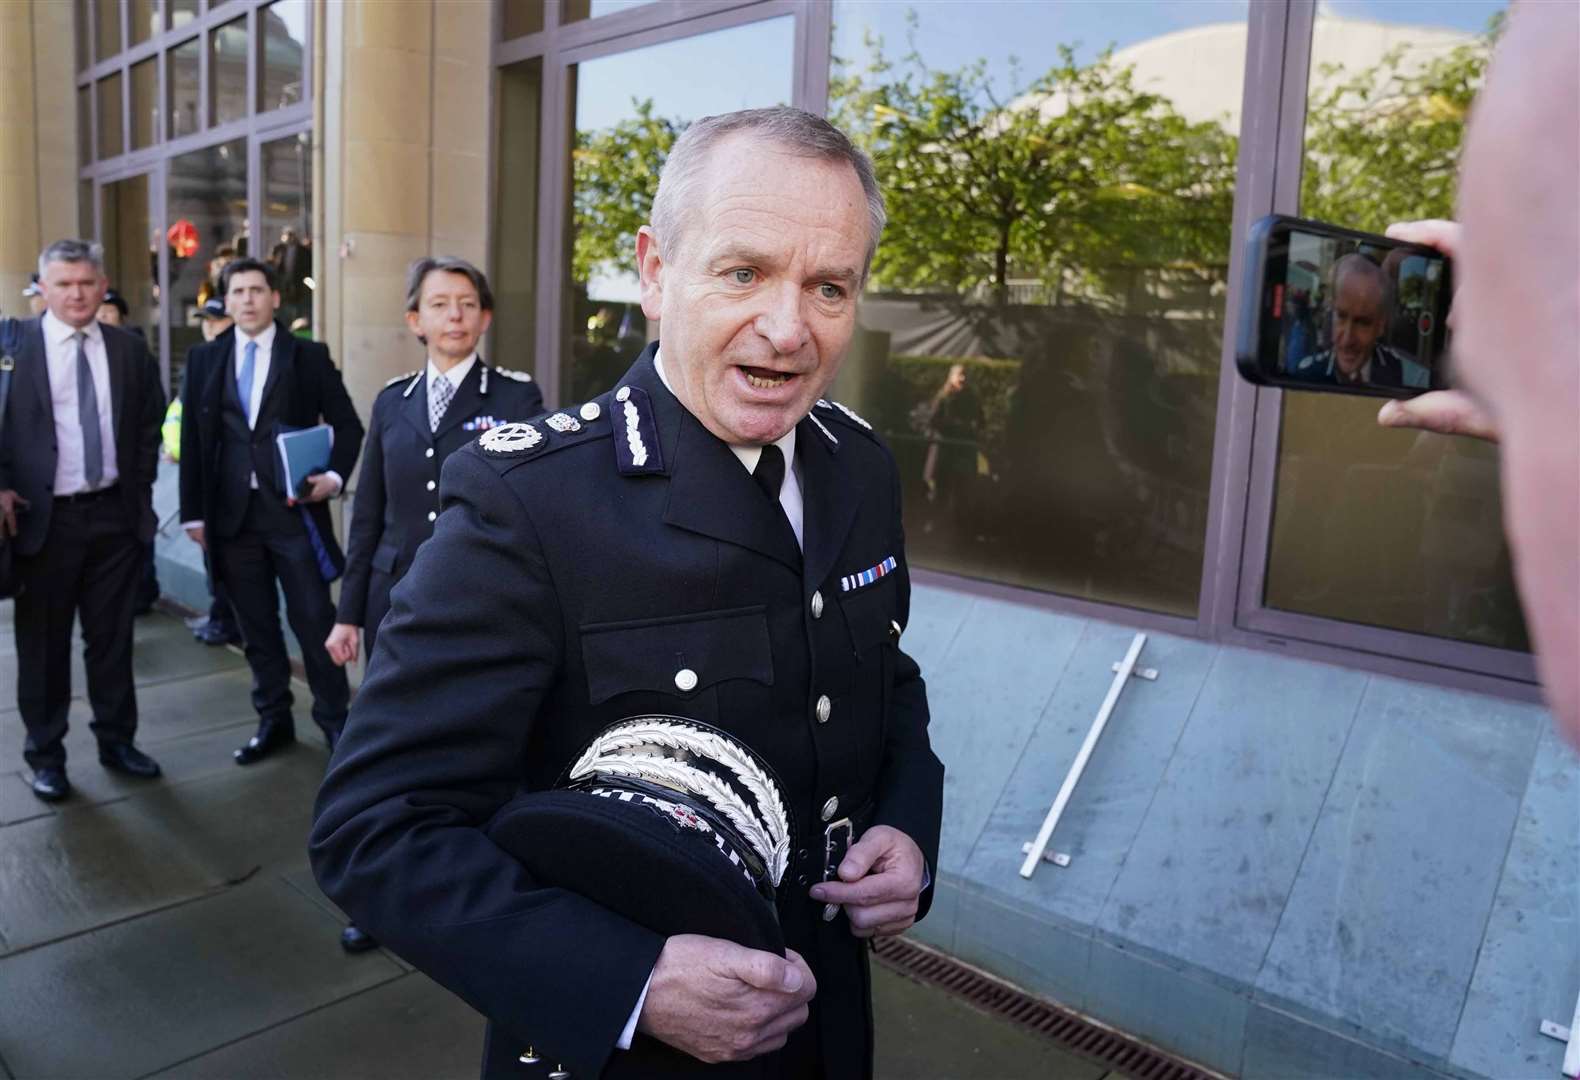 Iain Livingstone, Chief Constable of Police Scotland, arrives at Capital House in Edinburgh ahead of the start of the public inquiry (Andrew Milligan/PA)